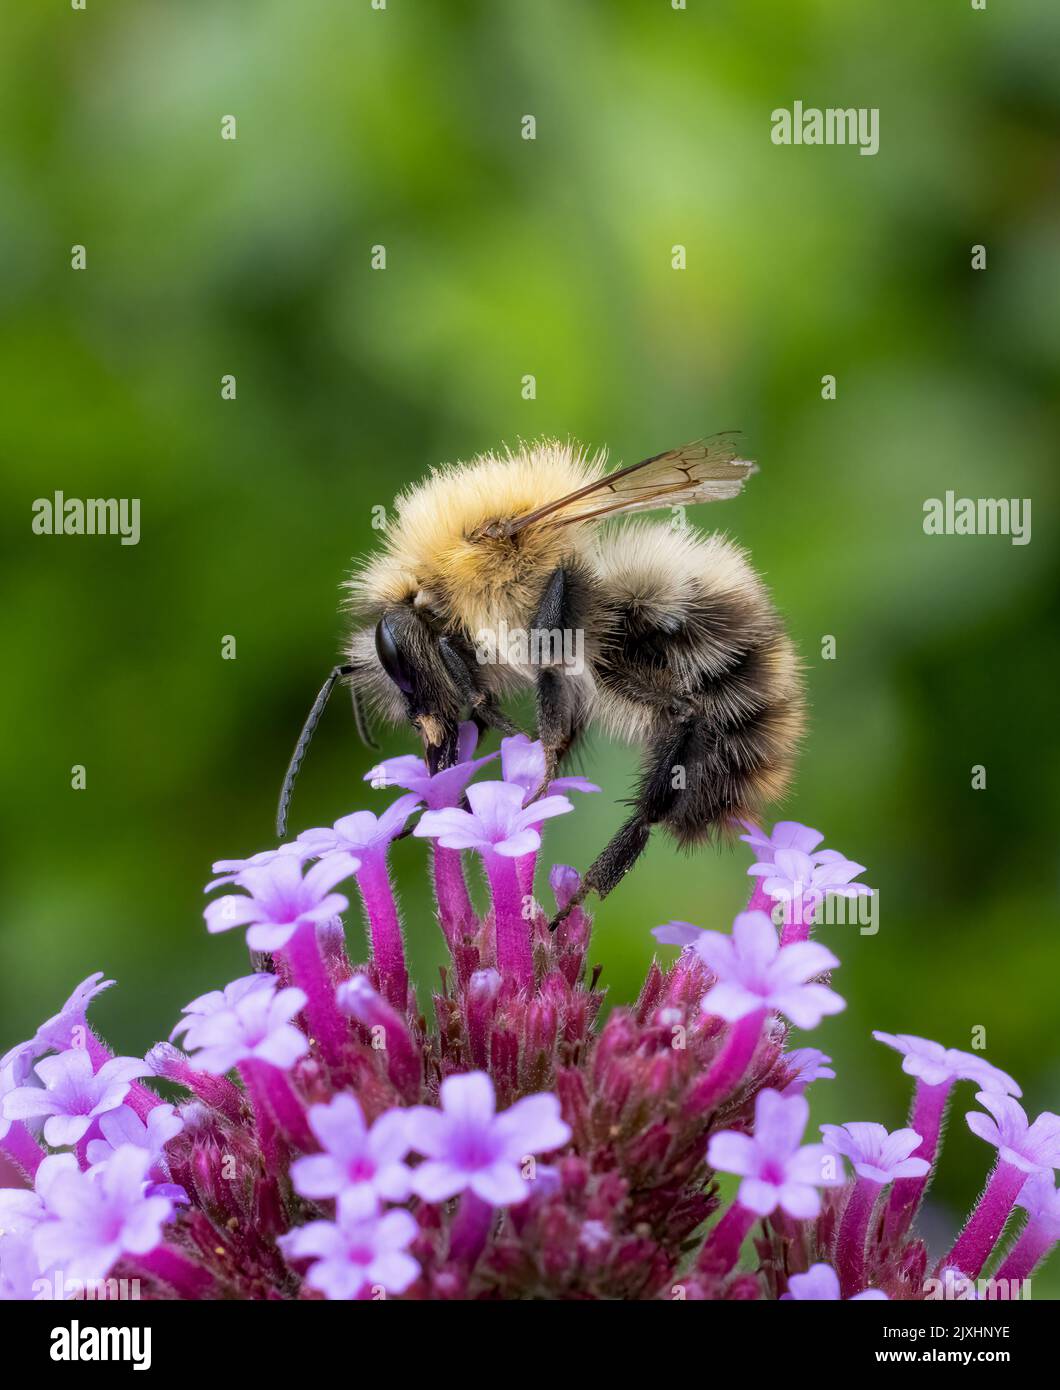 A Carder Bee, (Bombus pascuorum), pollenating a Verbena flower Stock Photo